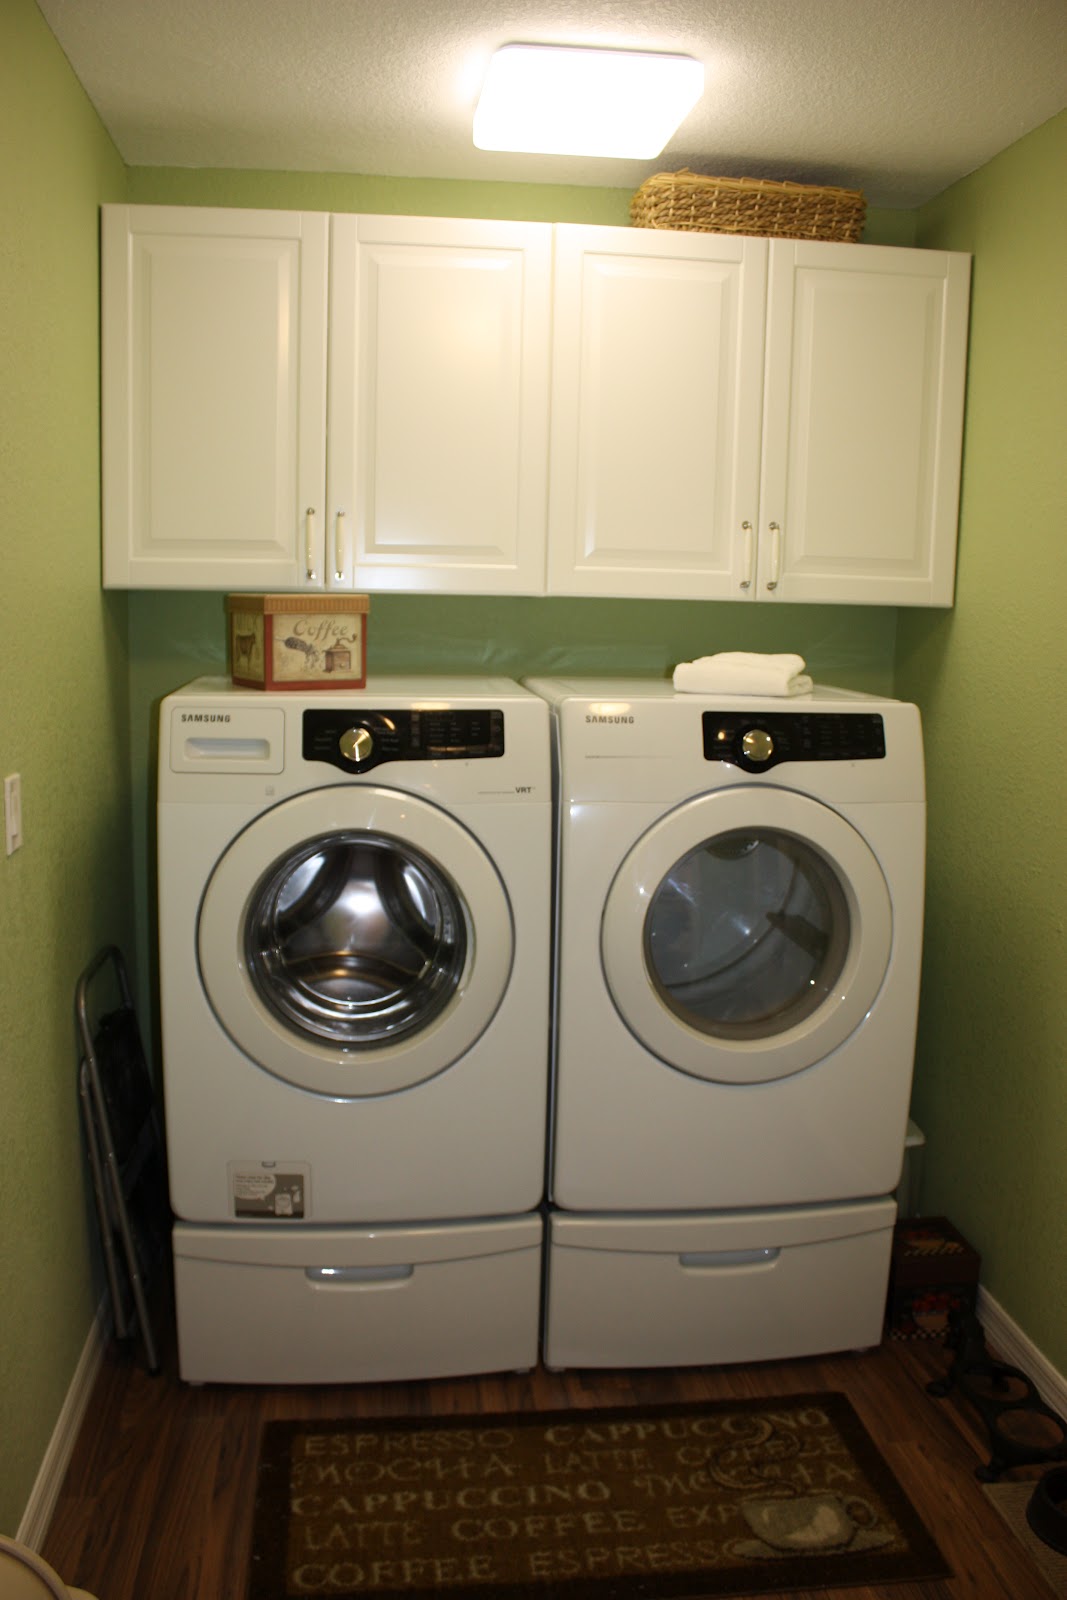 Are We There Yet?: Remodeled Laundry Room